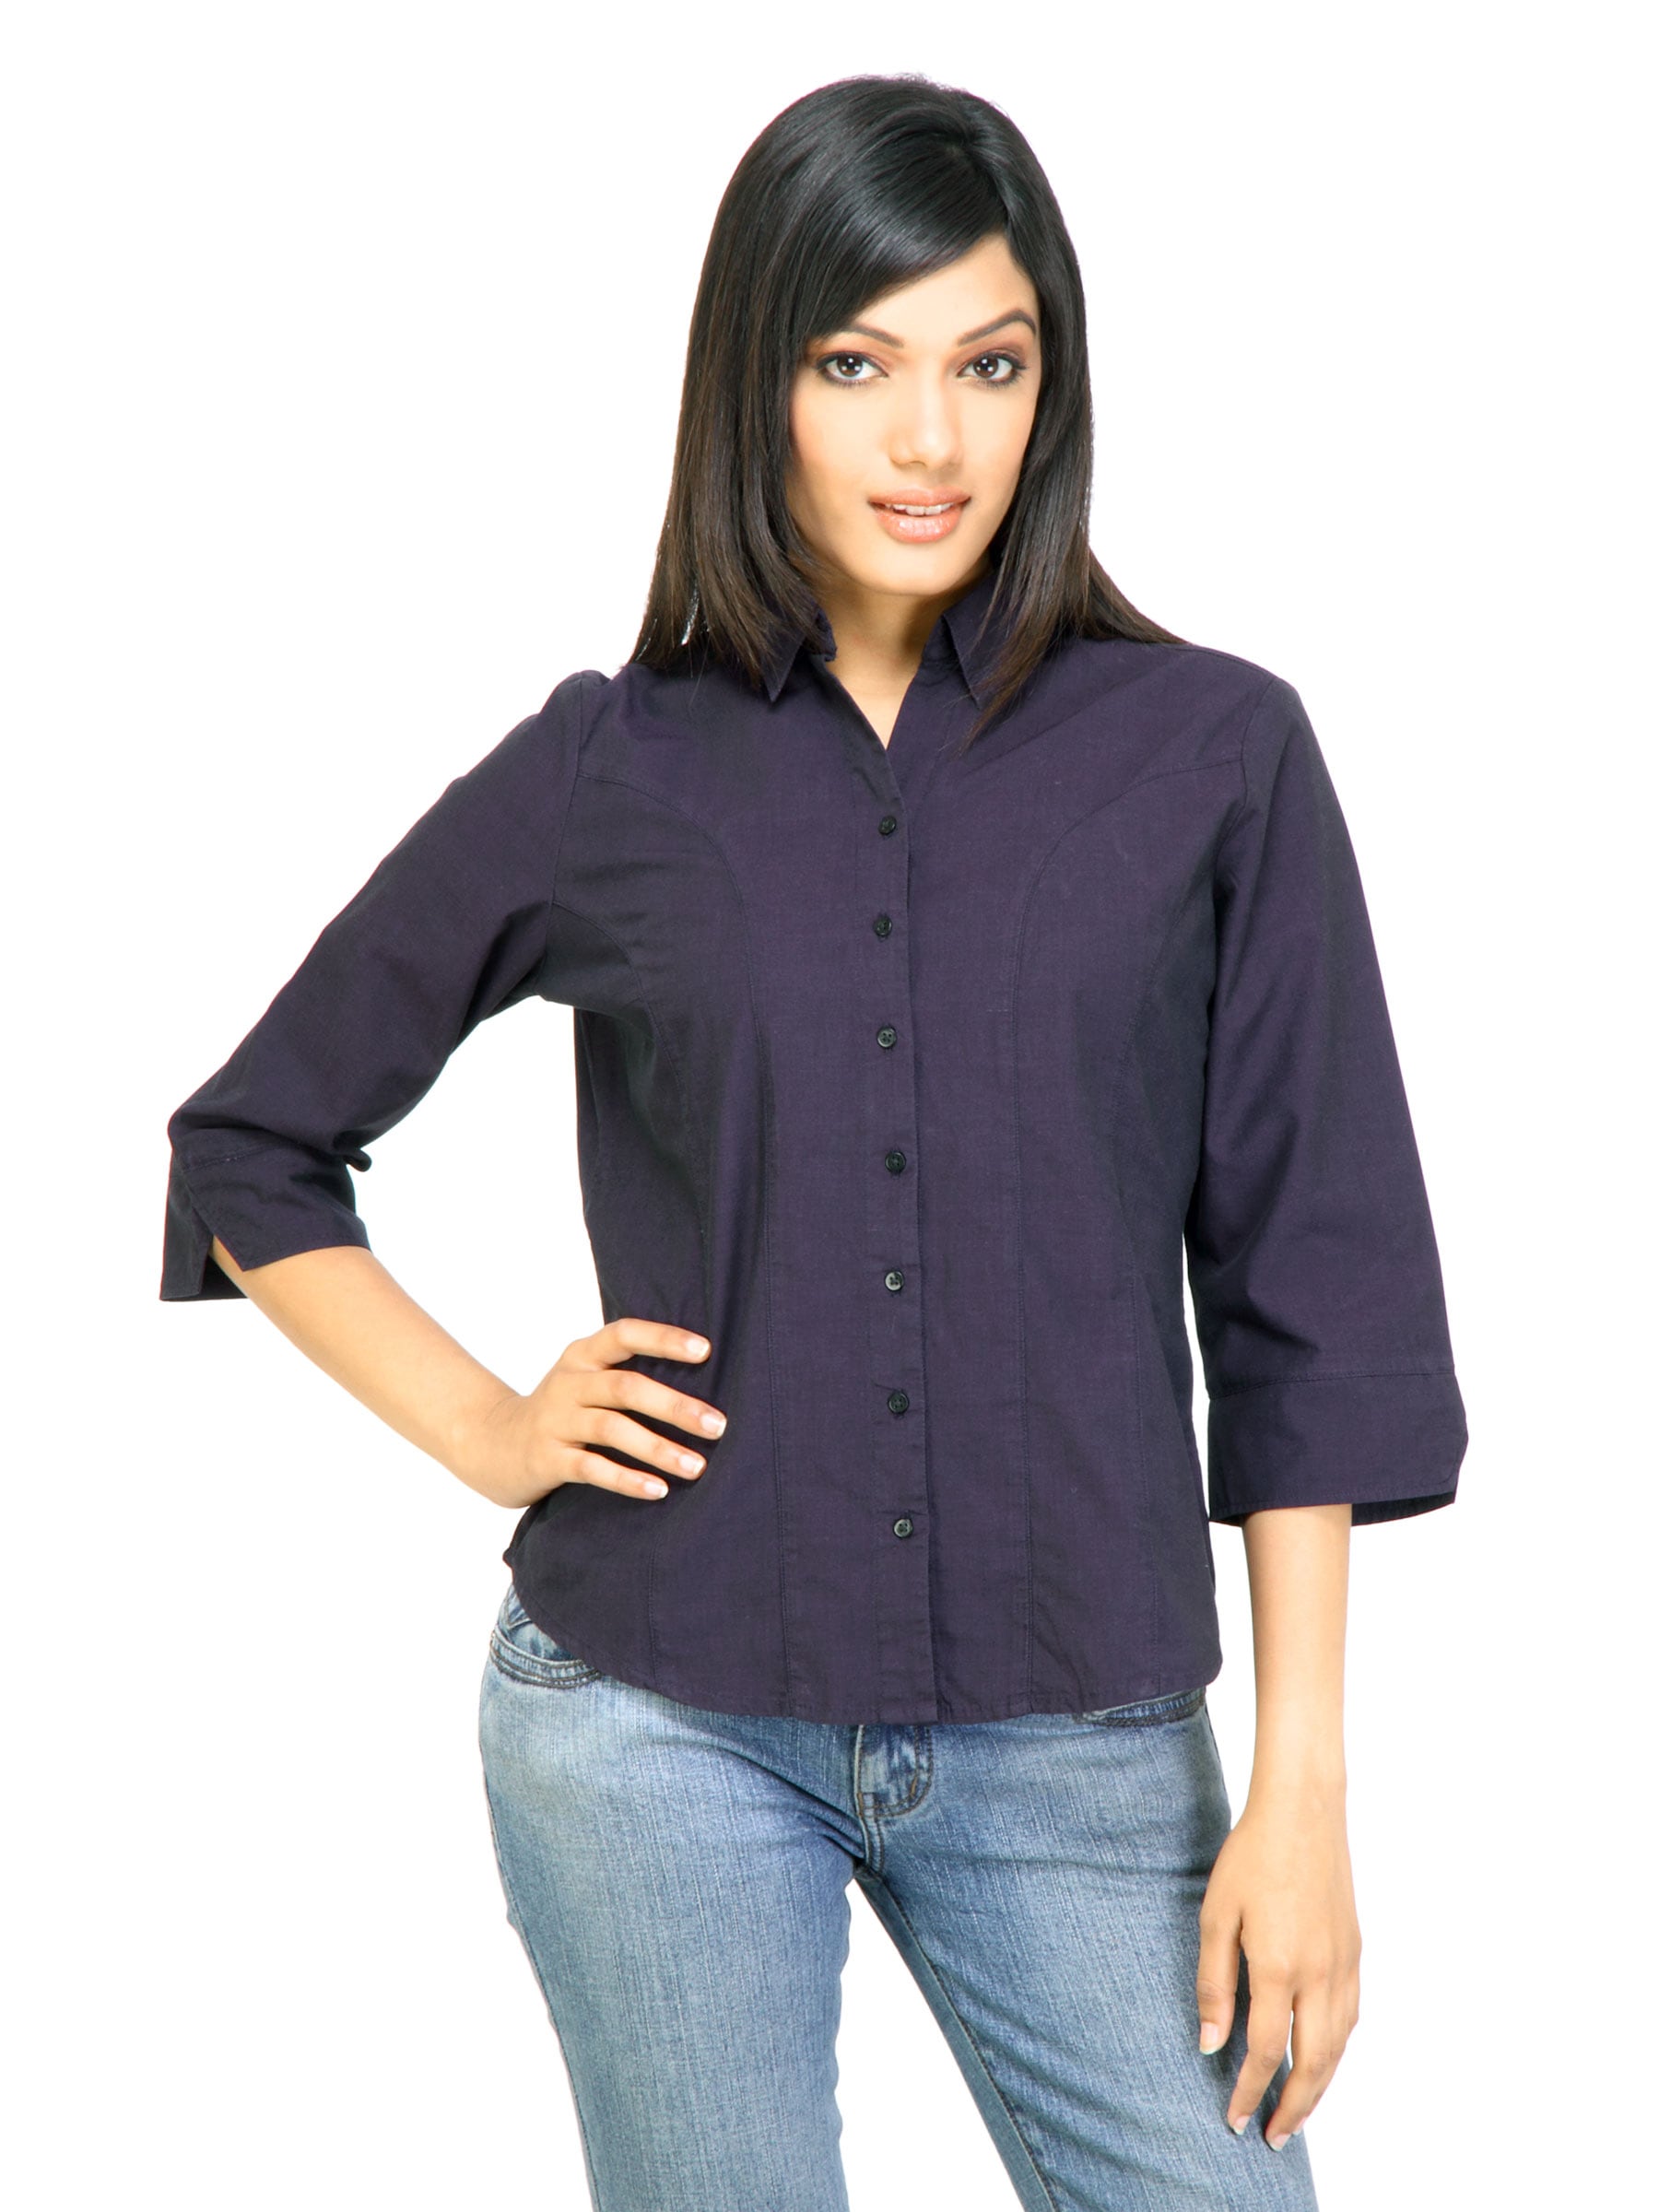 Scullers For Her Women Casual Shirt Purple Shirts